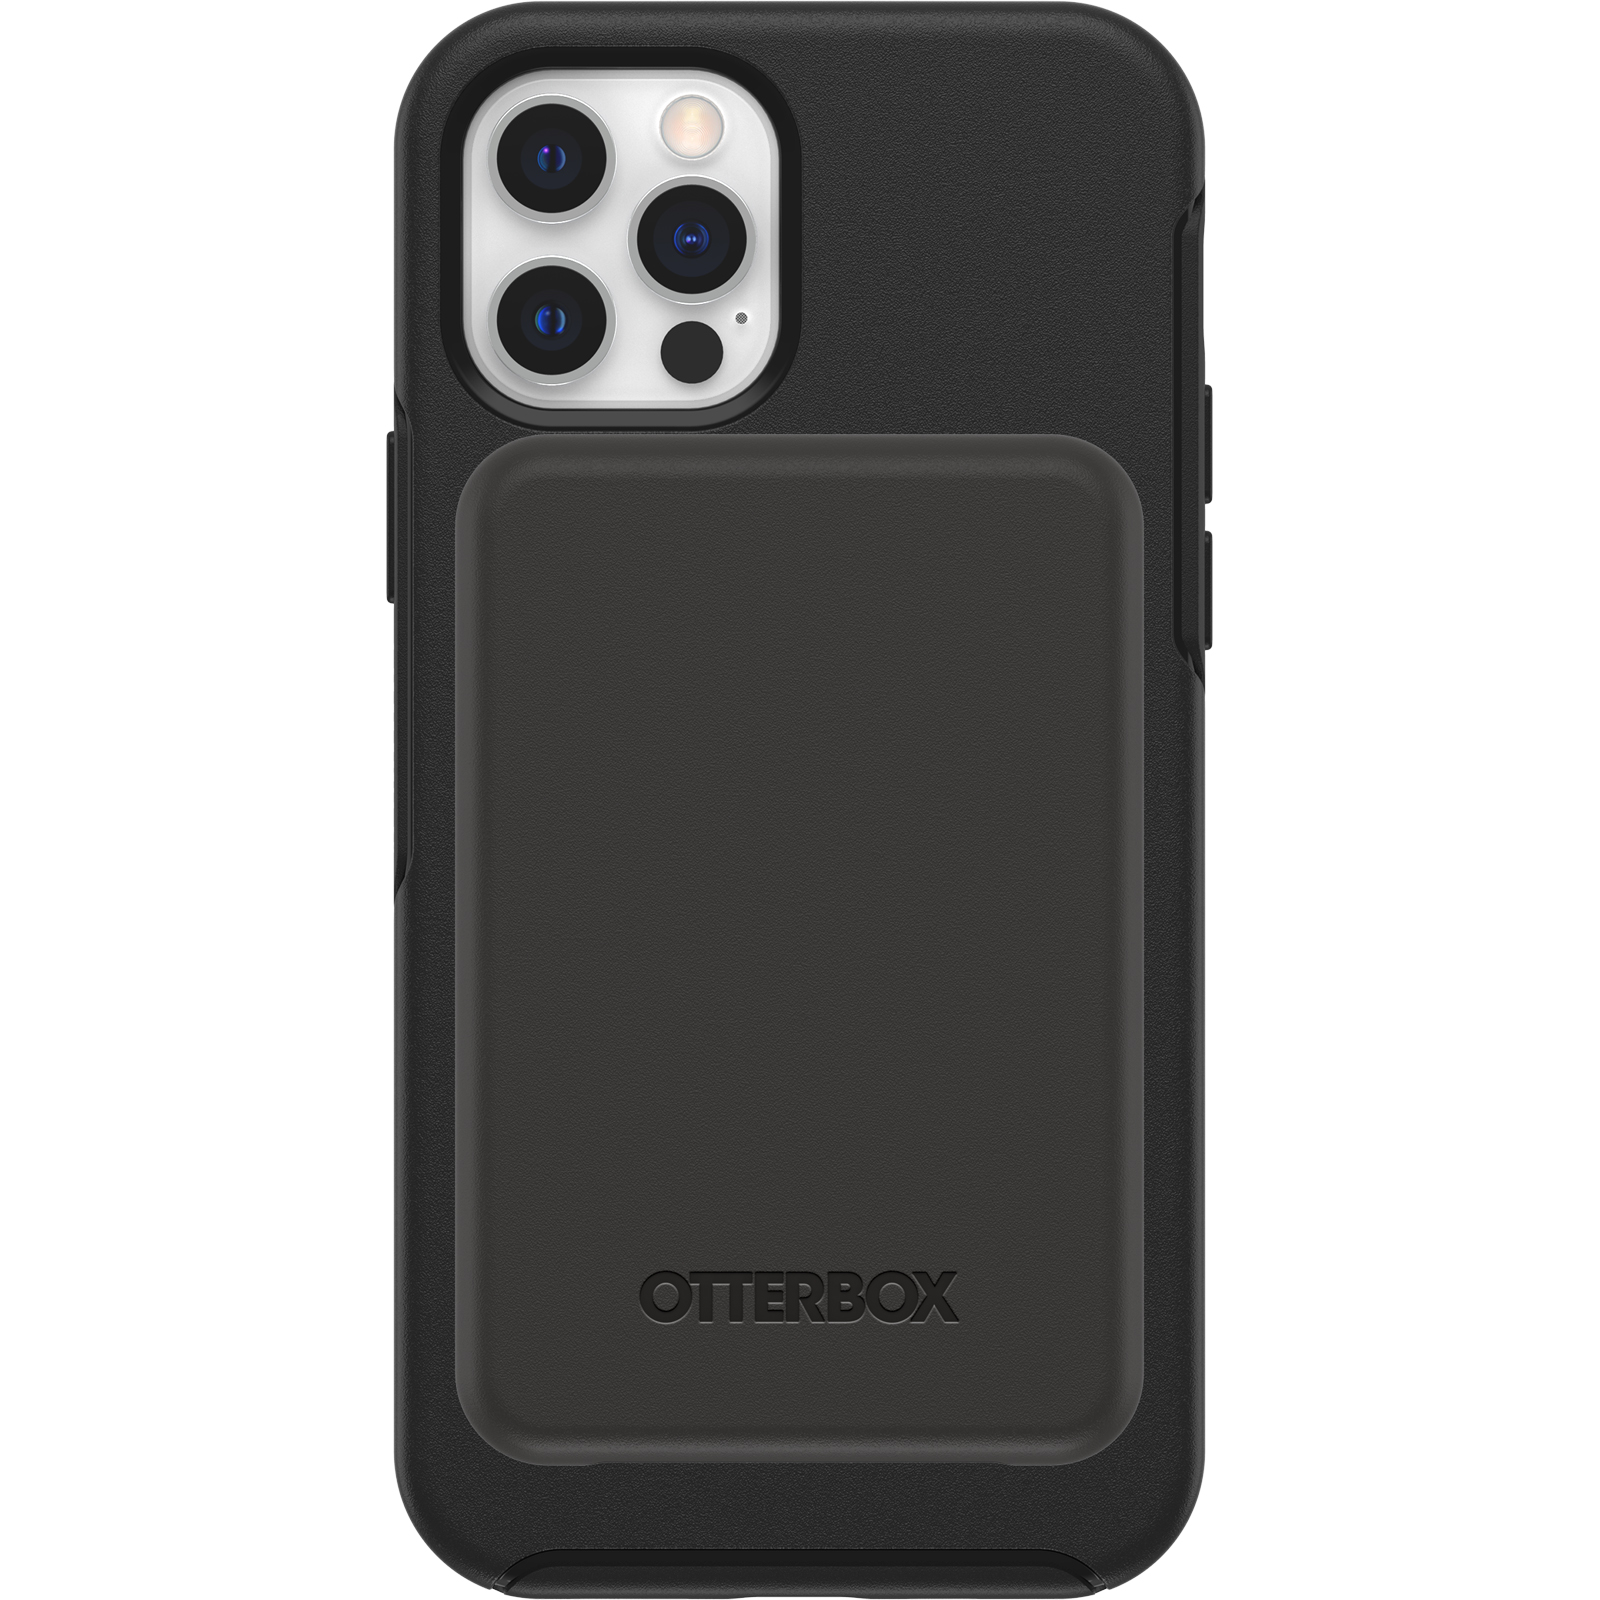 https://www.otterbox.com/on/demandware.static/-/Sites-masterCatalog/default/dw0c7db553/productimages/dis/accessories/wireless-power-bank-magsafe-3k/wireless-power-bank-magsafe-3k-radientnight-1.jpg